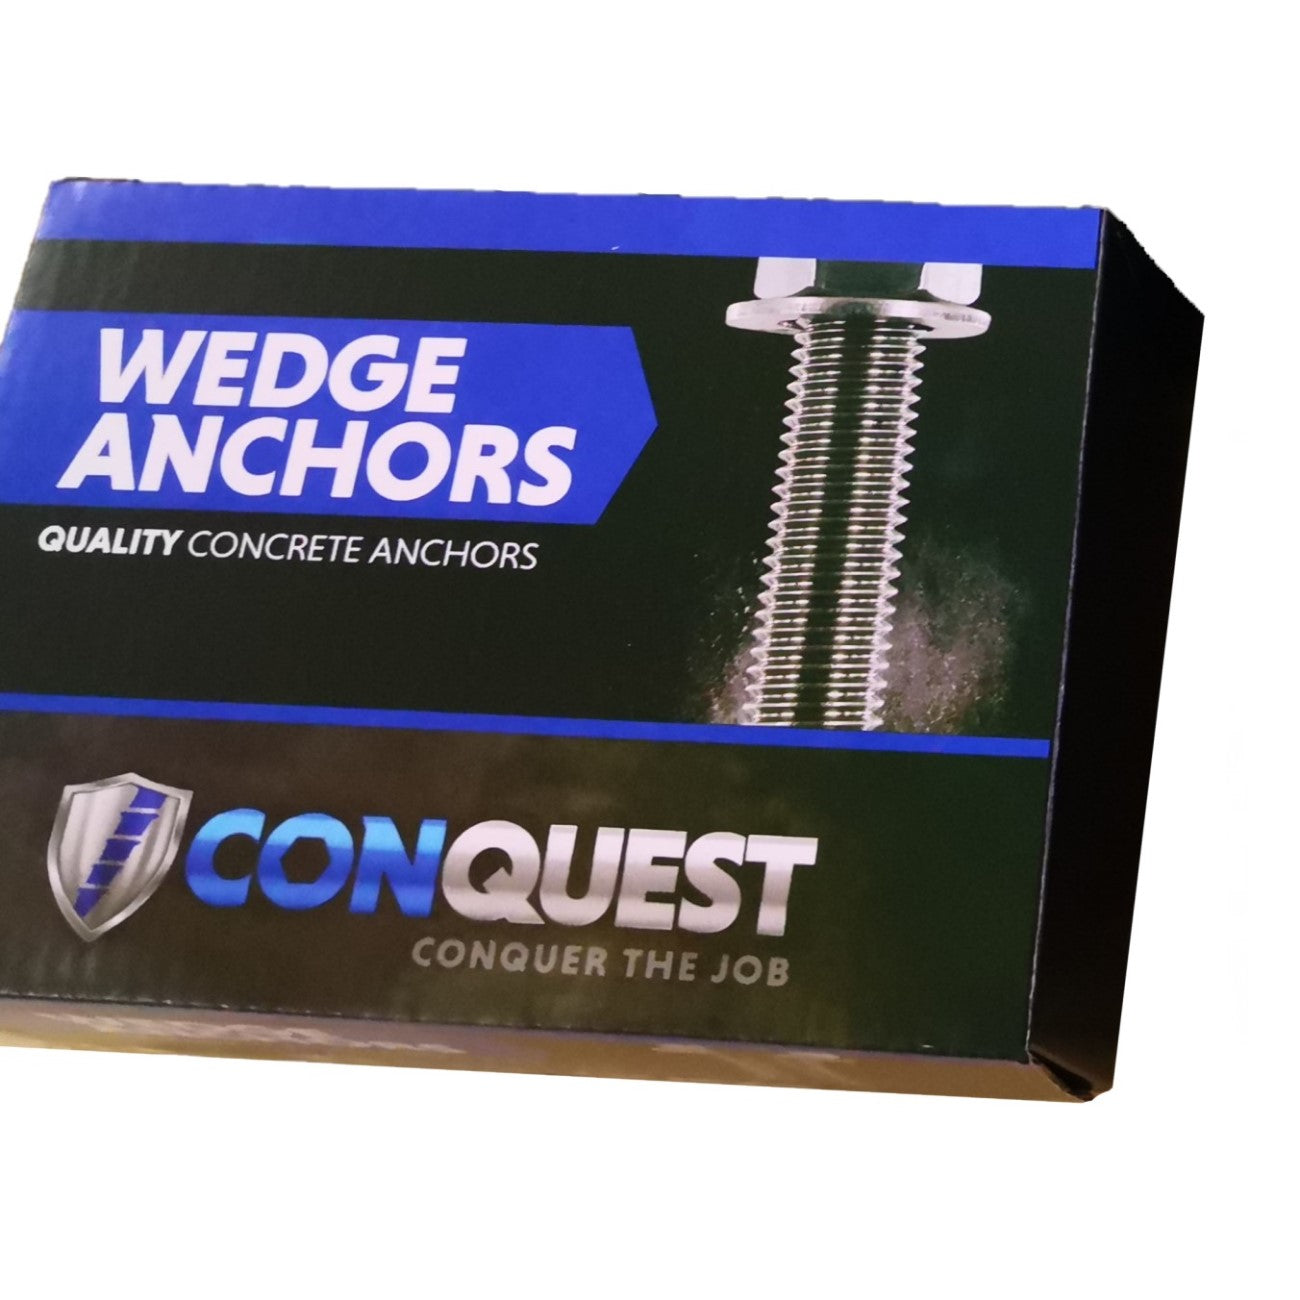 3/8" x 5" Conquest Wedge Anchors - 304 Stainless Steel, Pkg 50